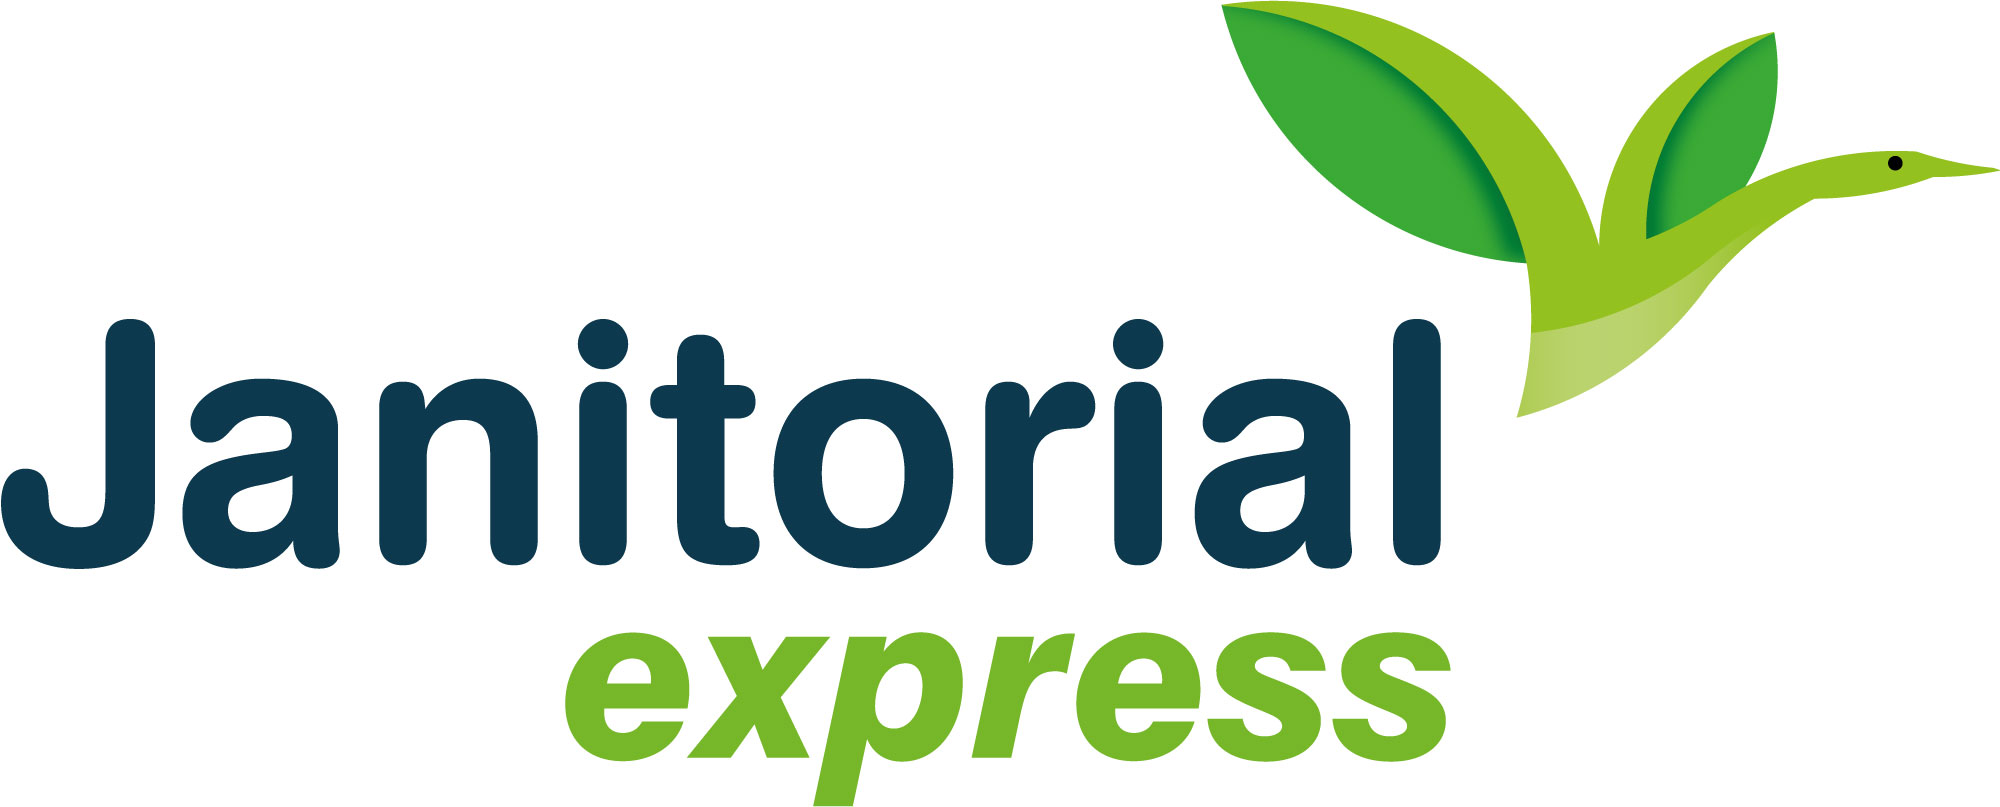 Eco Janitorial Express